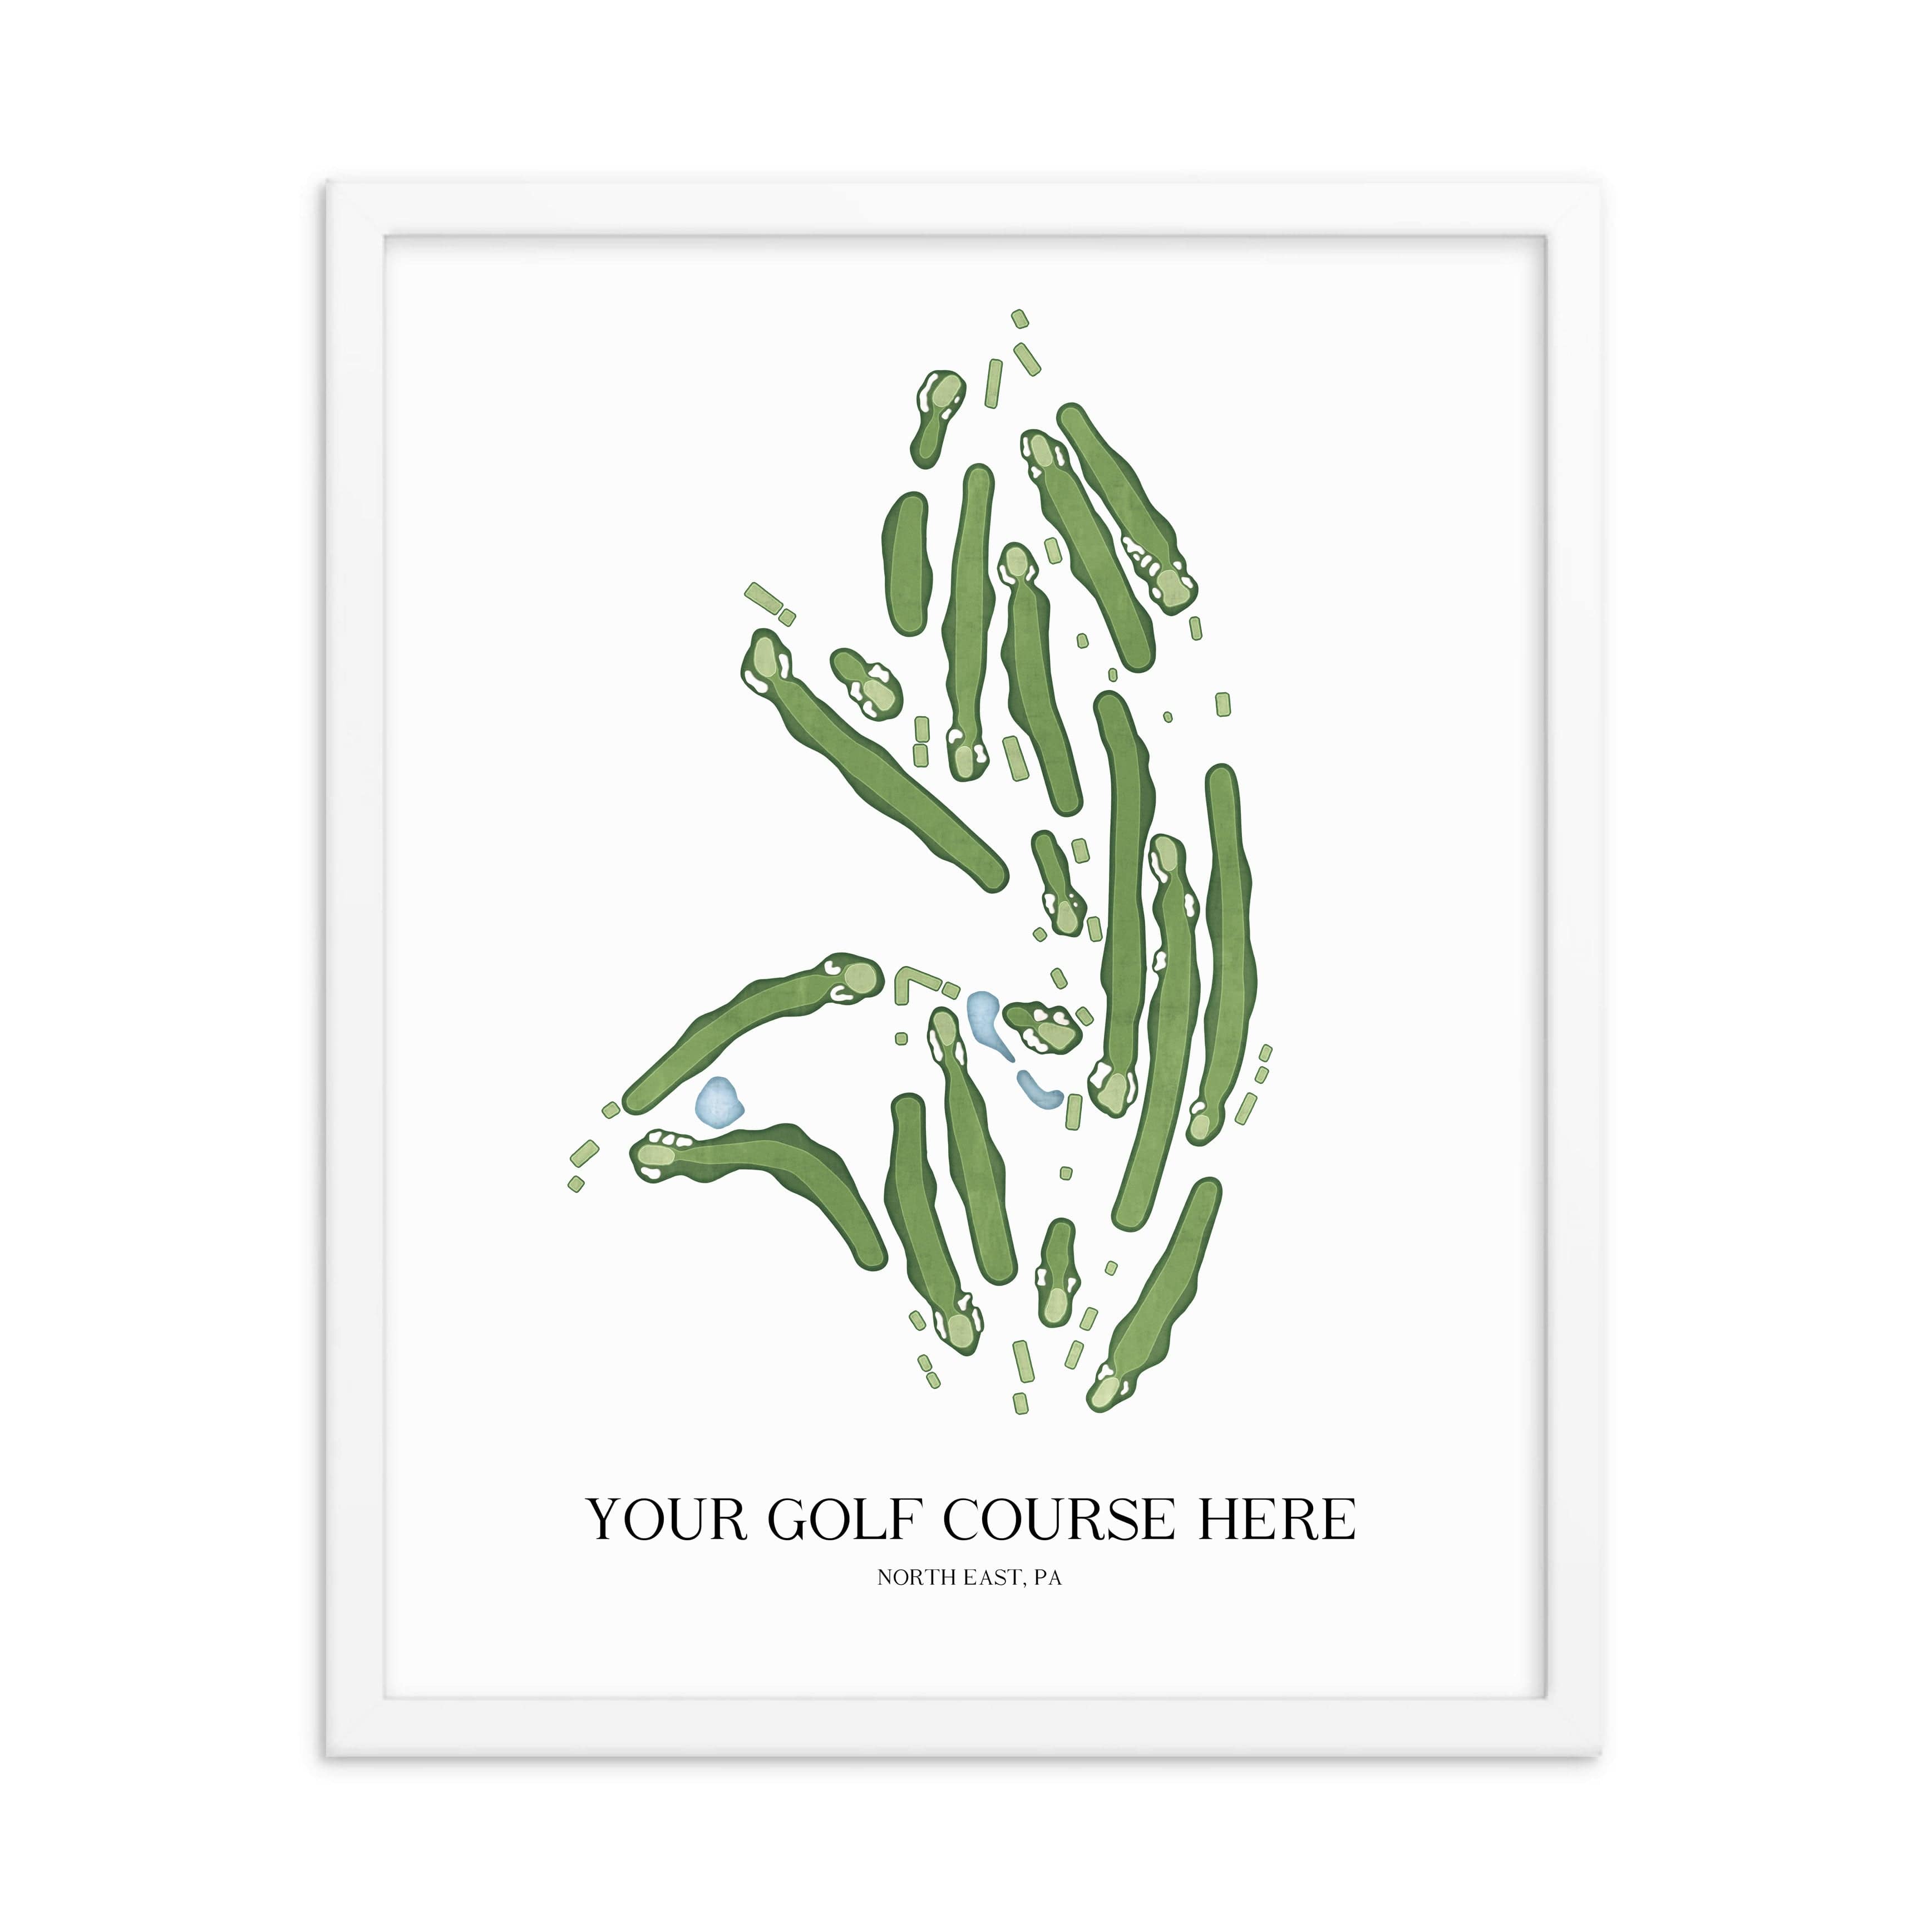 The 19th Hole Golf Shop - Golf Course Prints -  -Custom Course Request- Golf Course Map